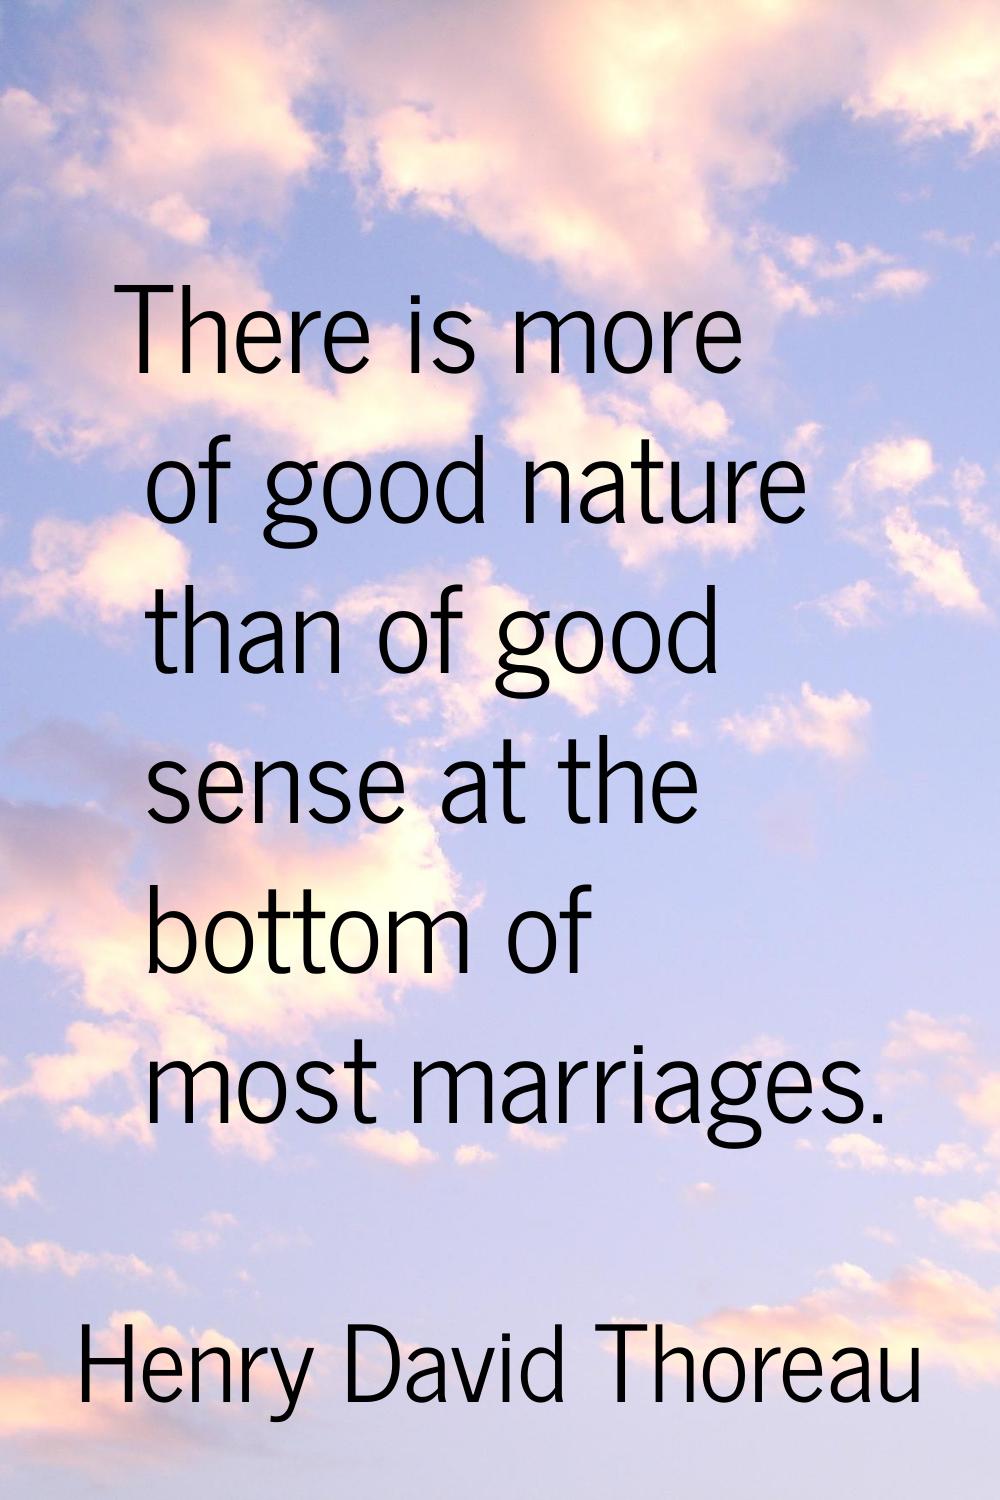 There is more of good nature than of good sense at the bottom of most marriages.